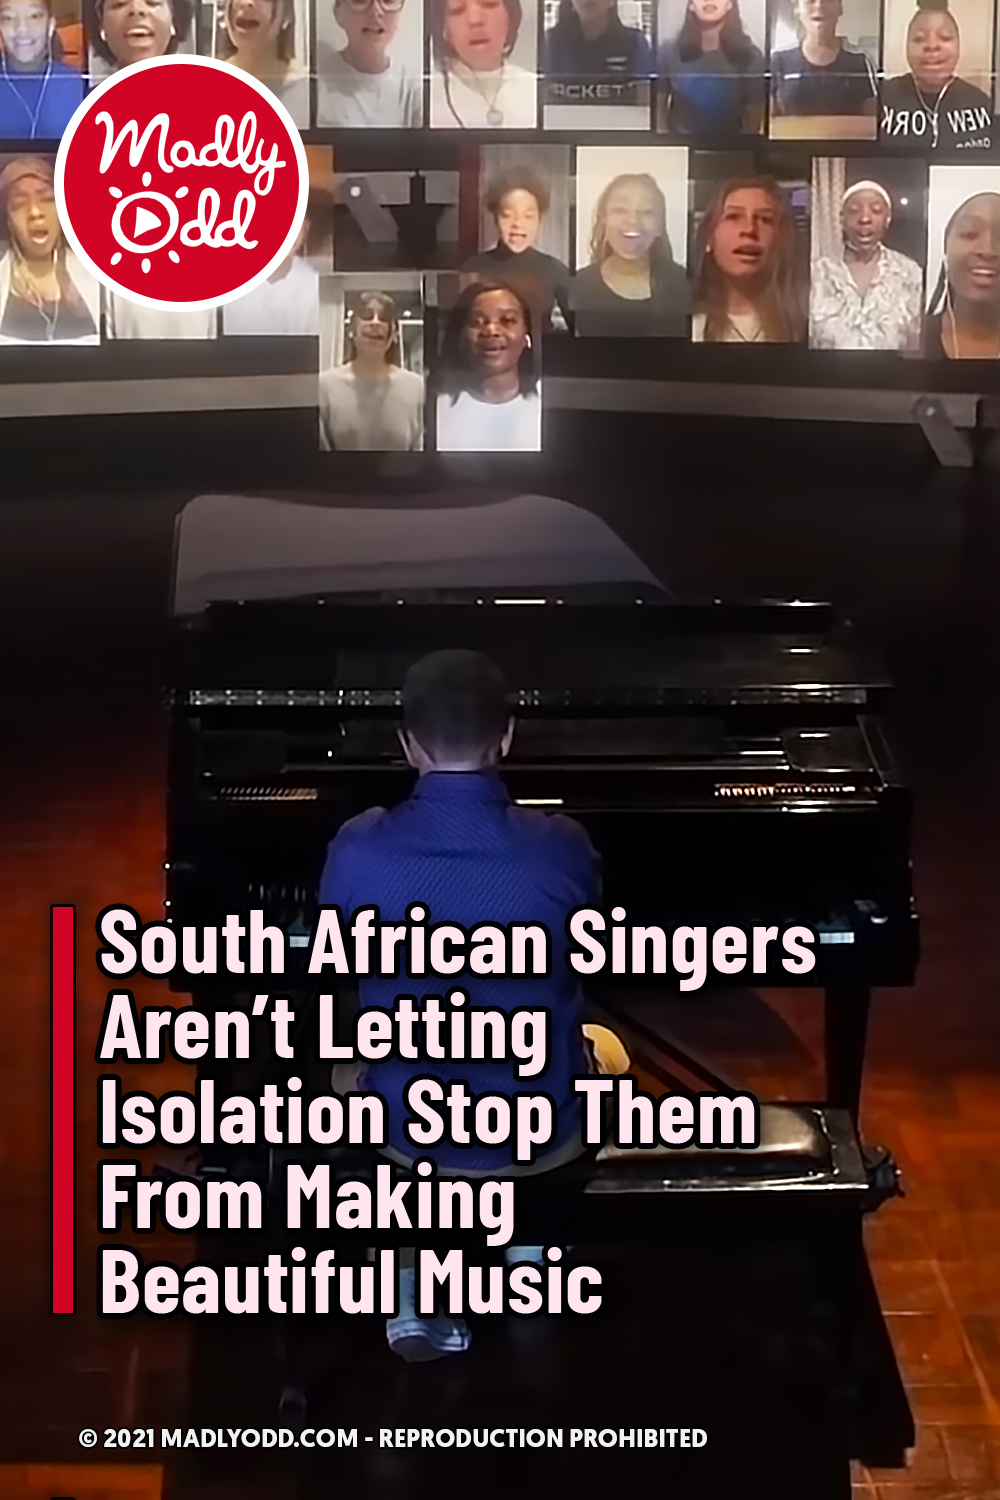 South African Singers Aren’t Letting Isolation Stop Them From Making Beautiful Music